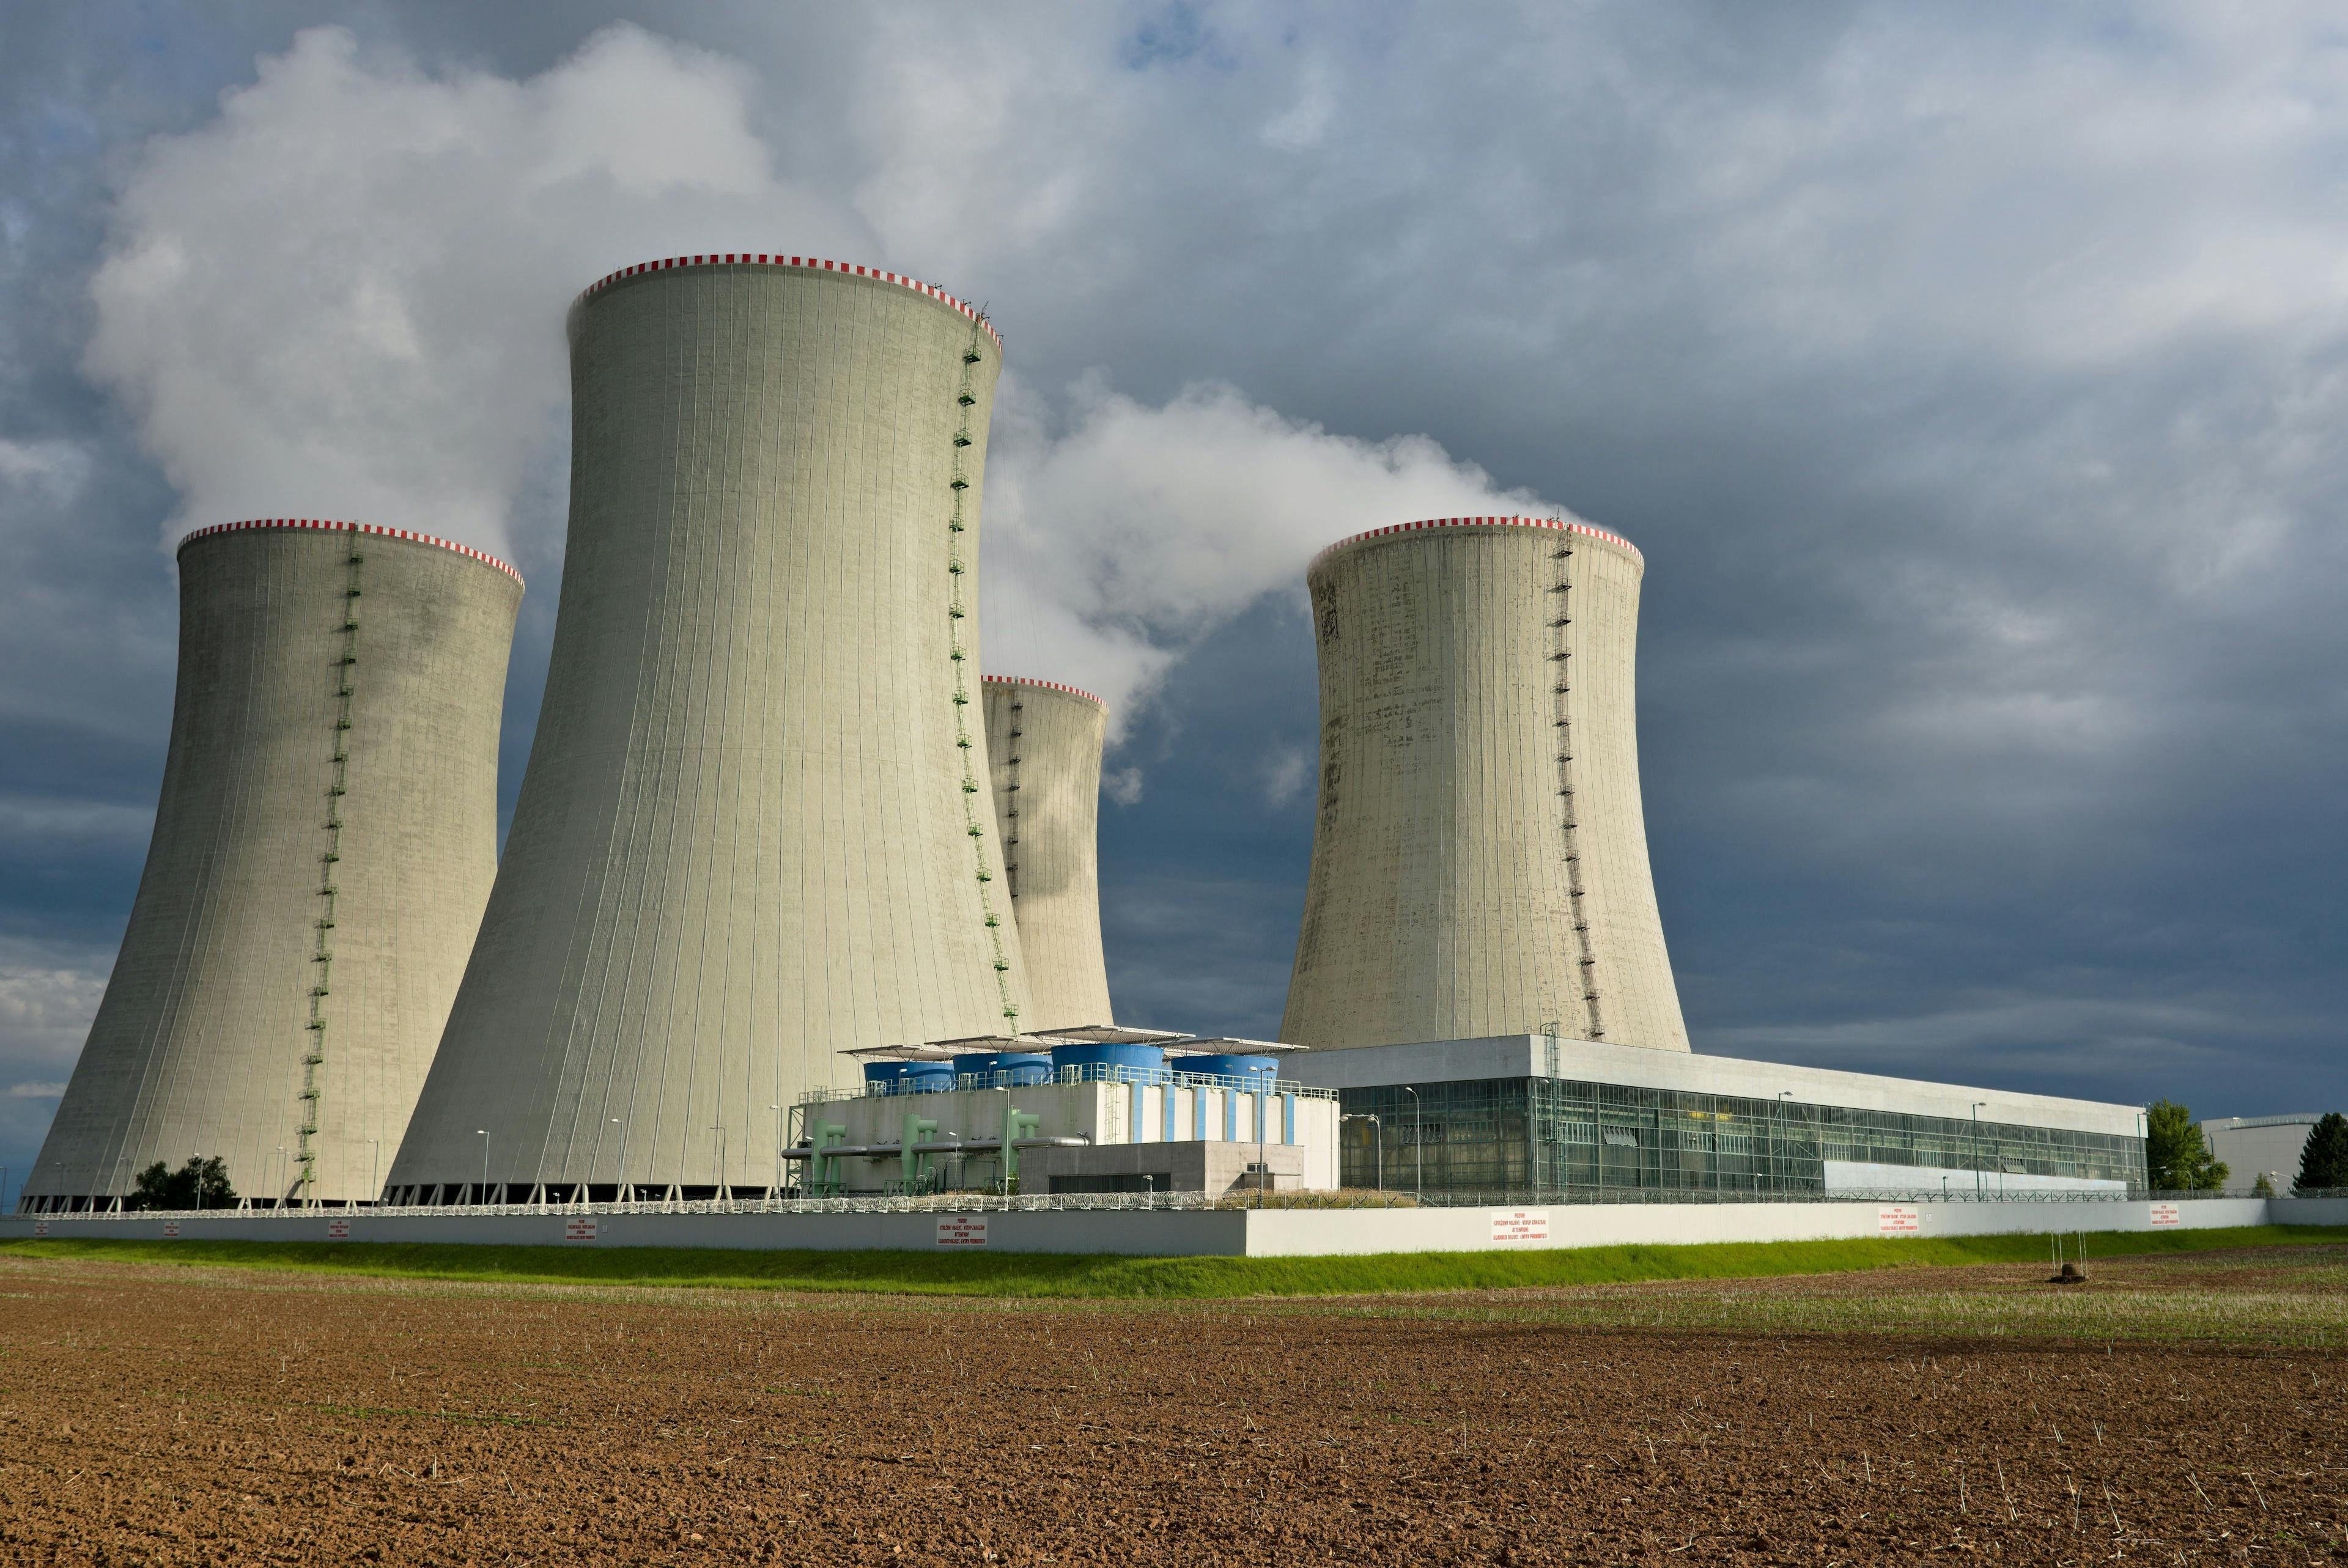 EU discussion on nuclear energy in Paris